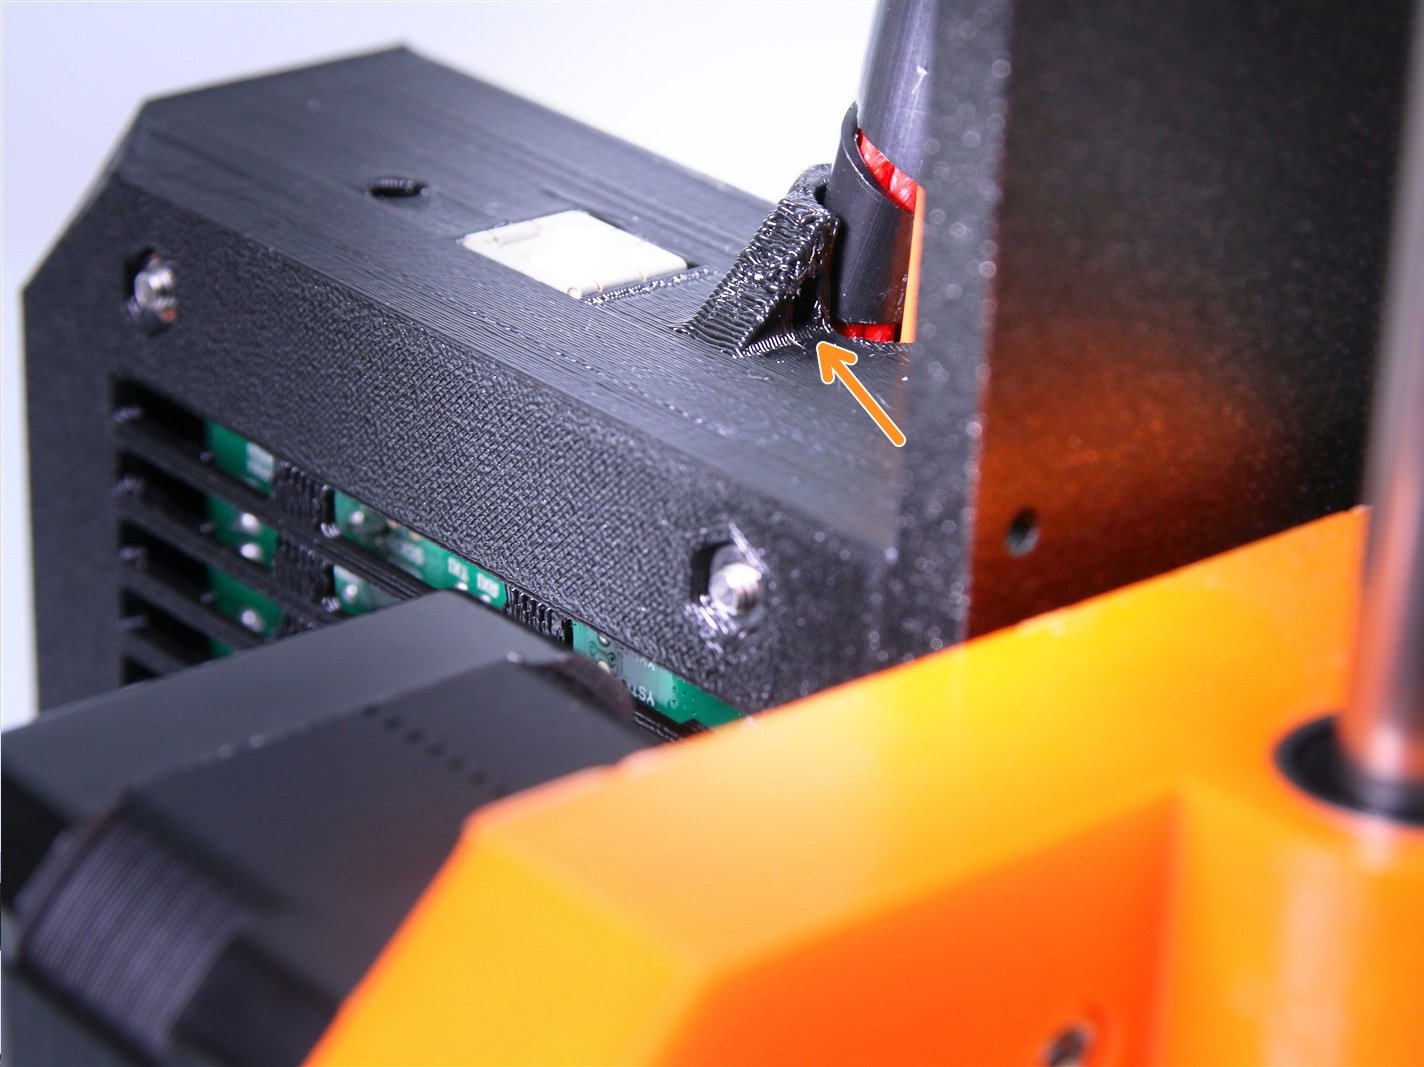 Securing extruder cables to the Rambo cover base